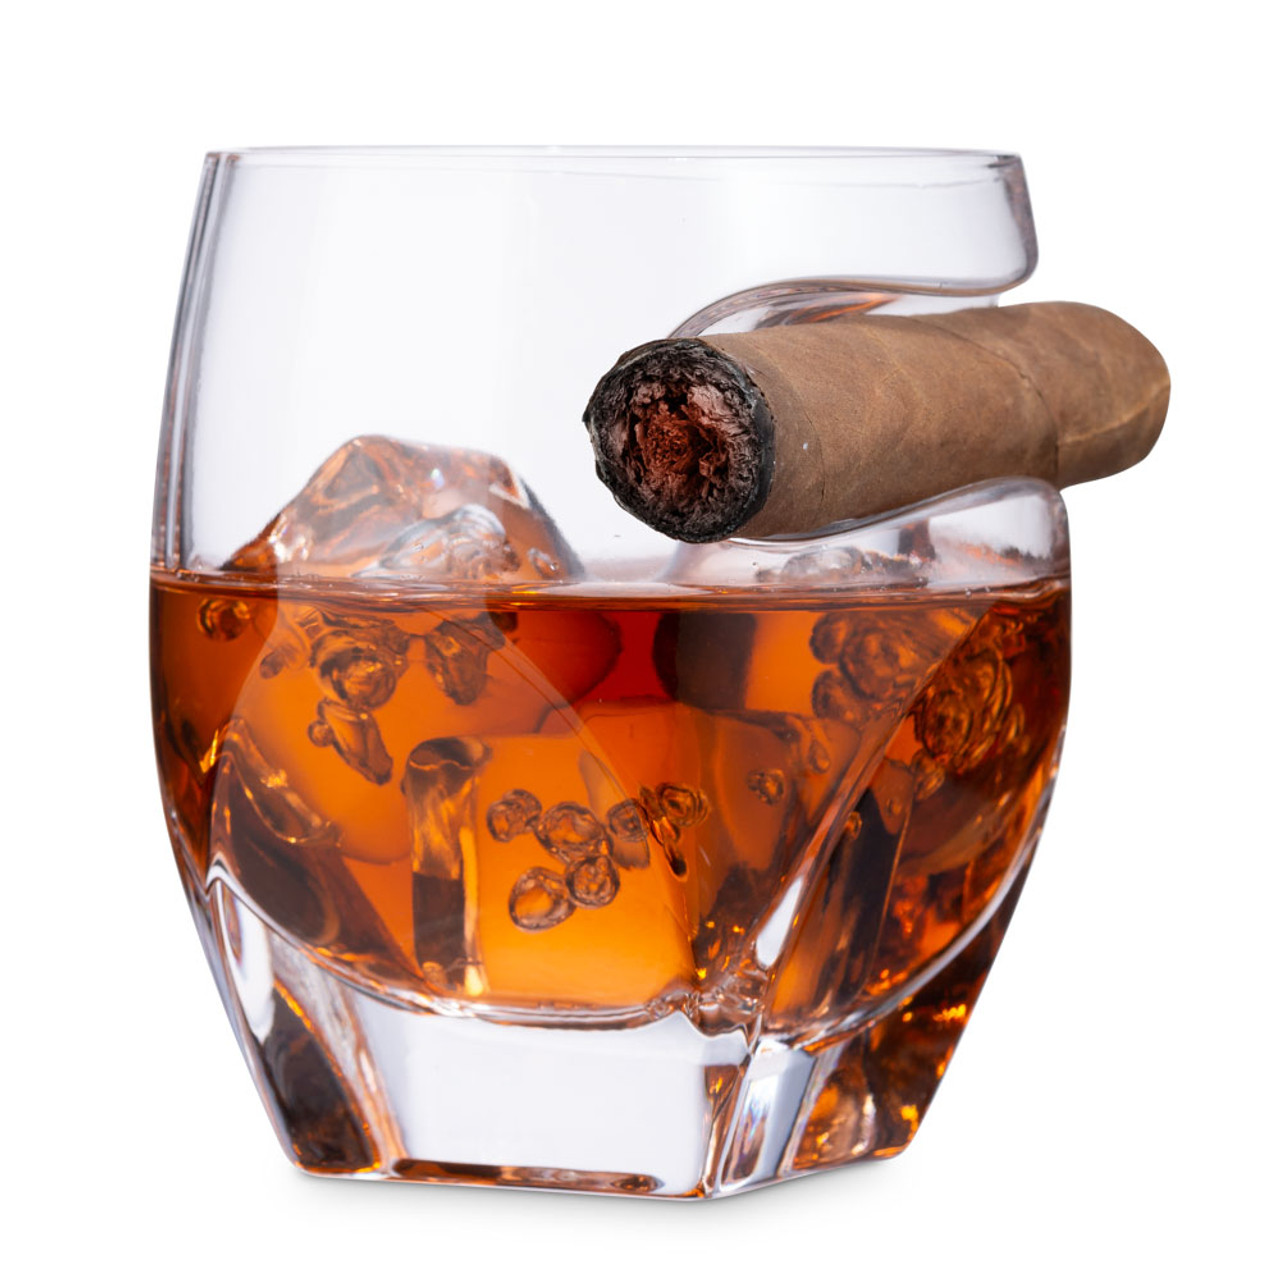 https://cdn11.bigcommerce.com/s-cznxq08r7/images/stencil/1280x1280/products/4933/13687/27387-Godinger-Arturo-Cigar-Whiskey-Tumblers-With-Indented-Cigar-Rest-11-oz-Set-of-2-02__40947.1620332907.jpg?c=1